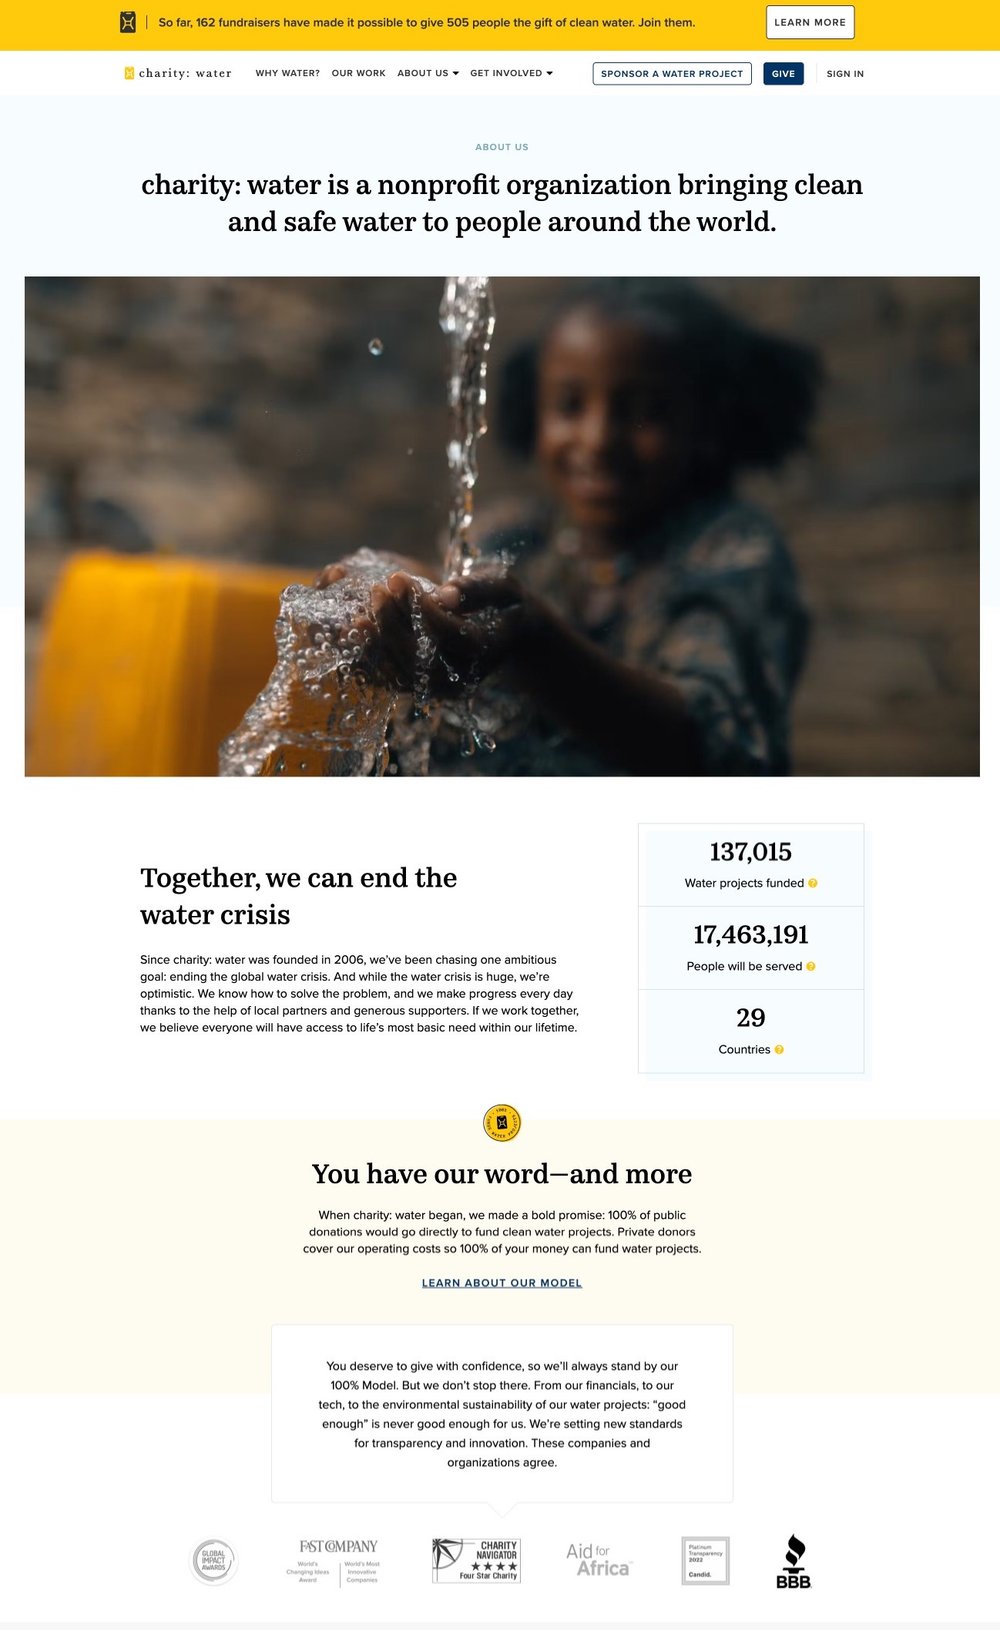 charity water about us 1.jpg